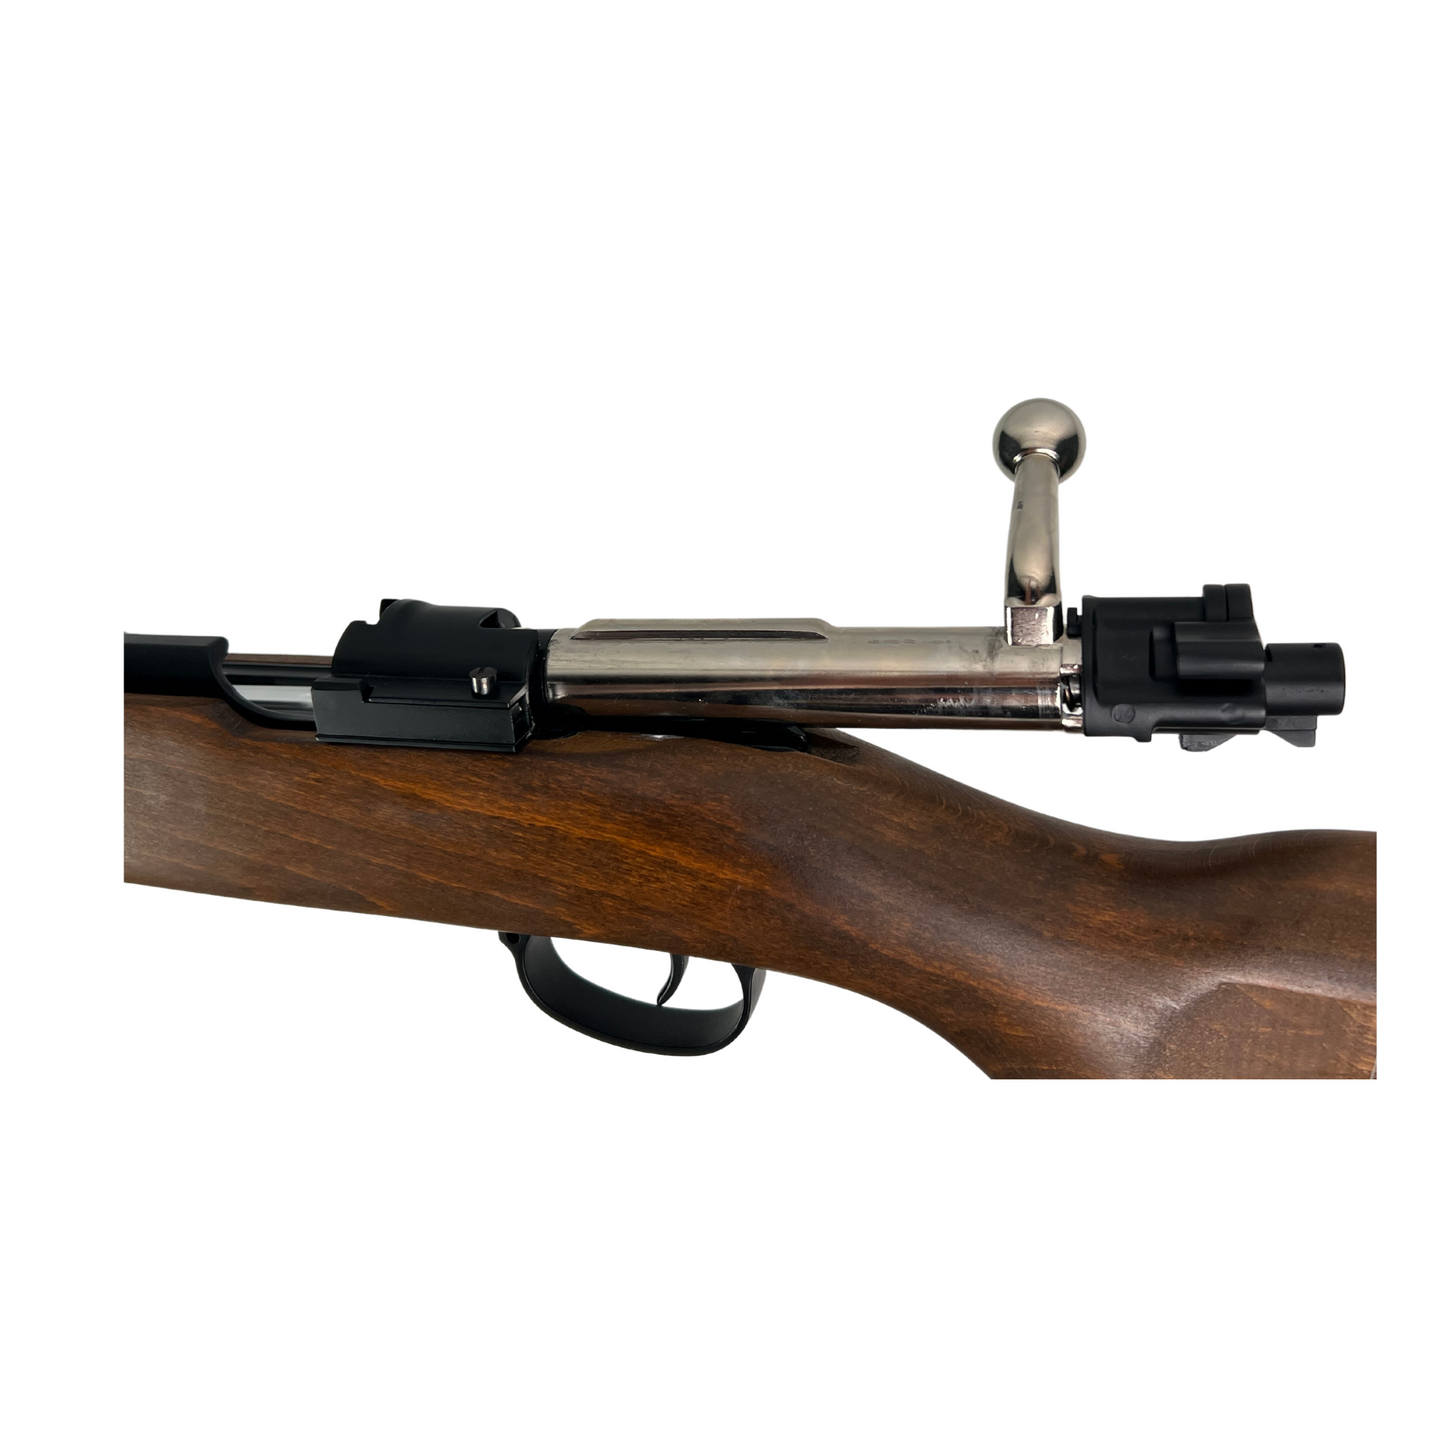 (Gas Powered) Double Bell KAR98k Metal/ Real Wood Shell Ejecting Sniper Rifle